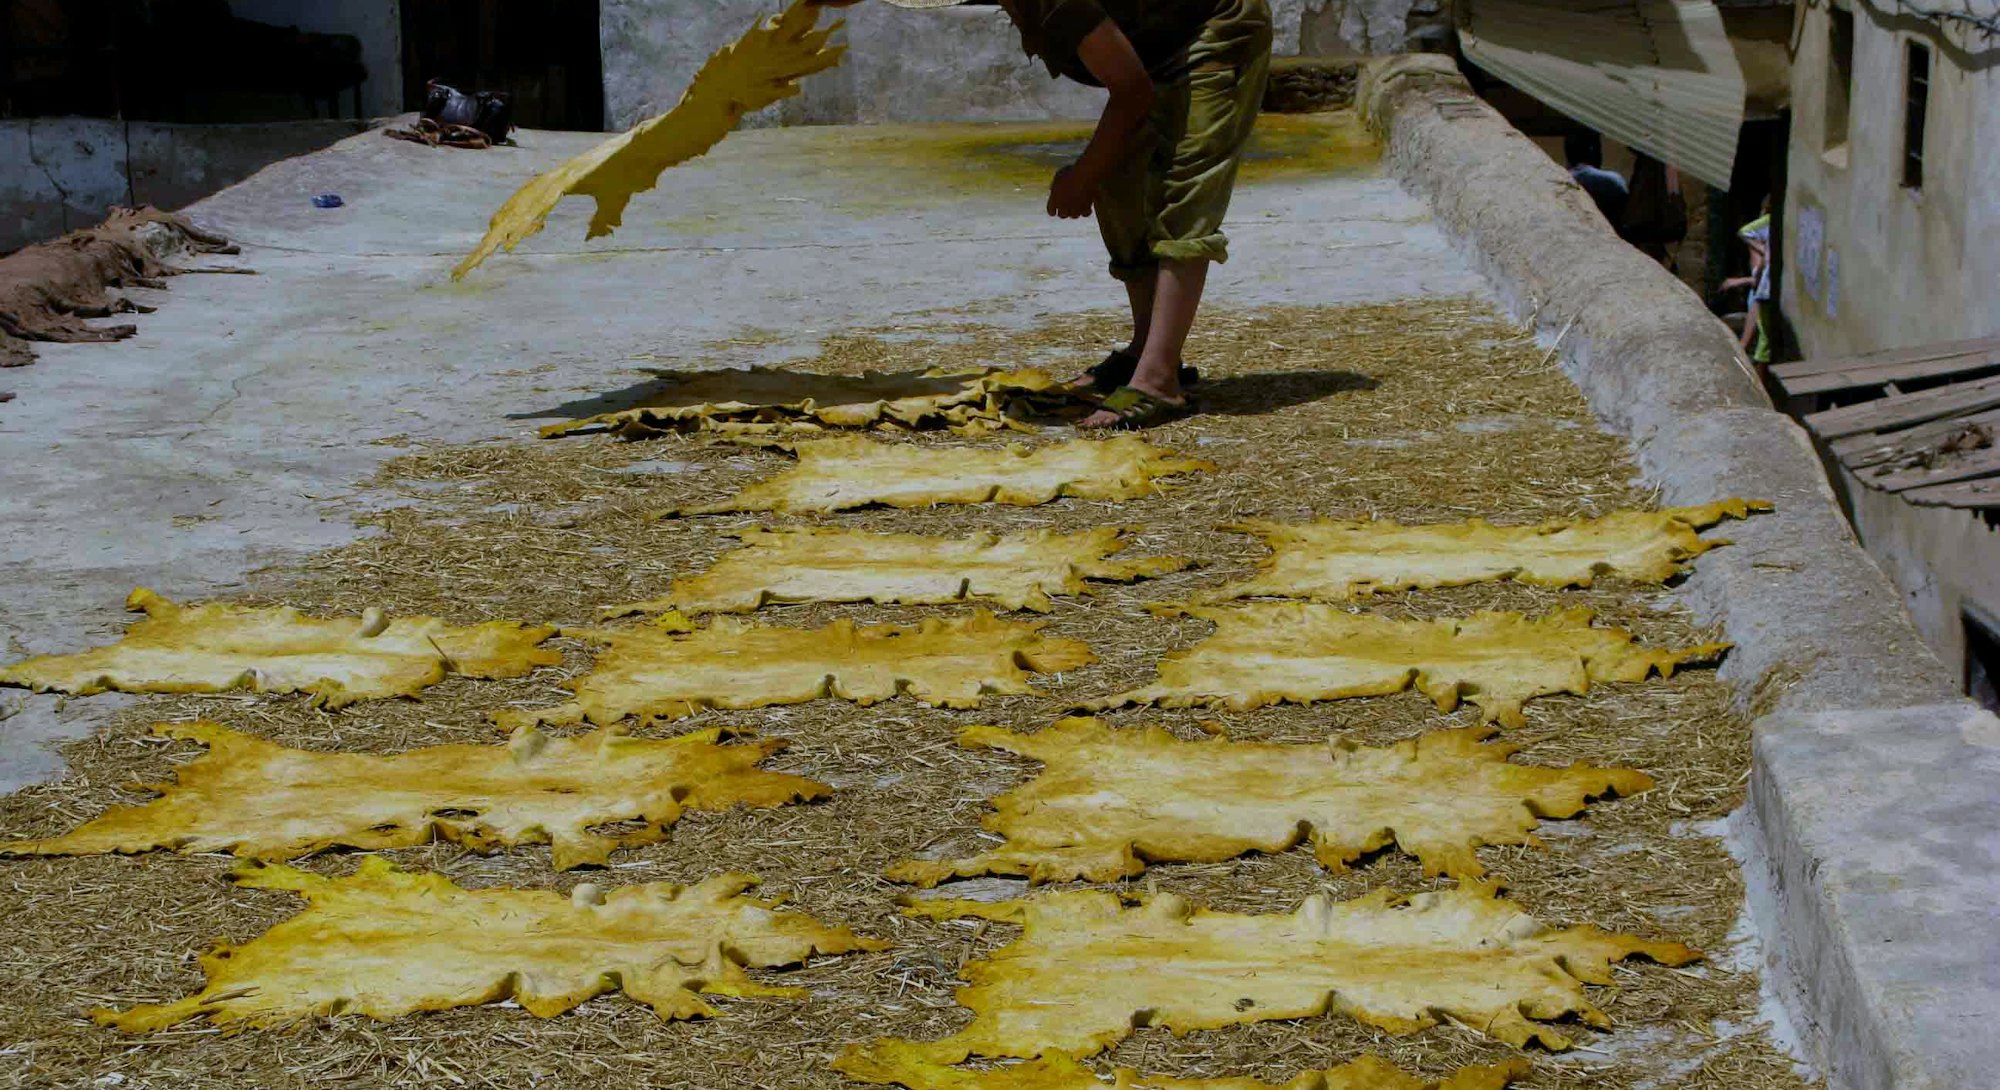 Hides drying in the sun at Chouara Tannery in Fez, Morocco